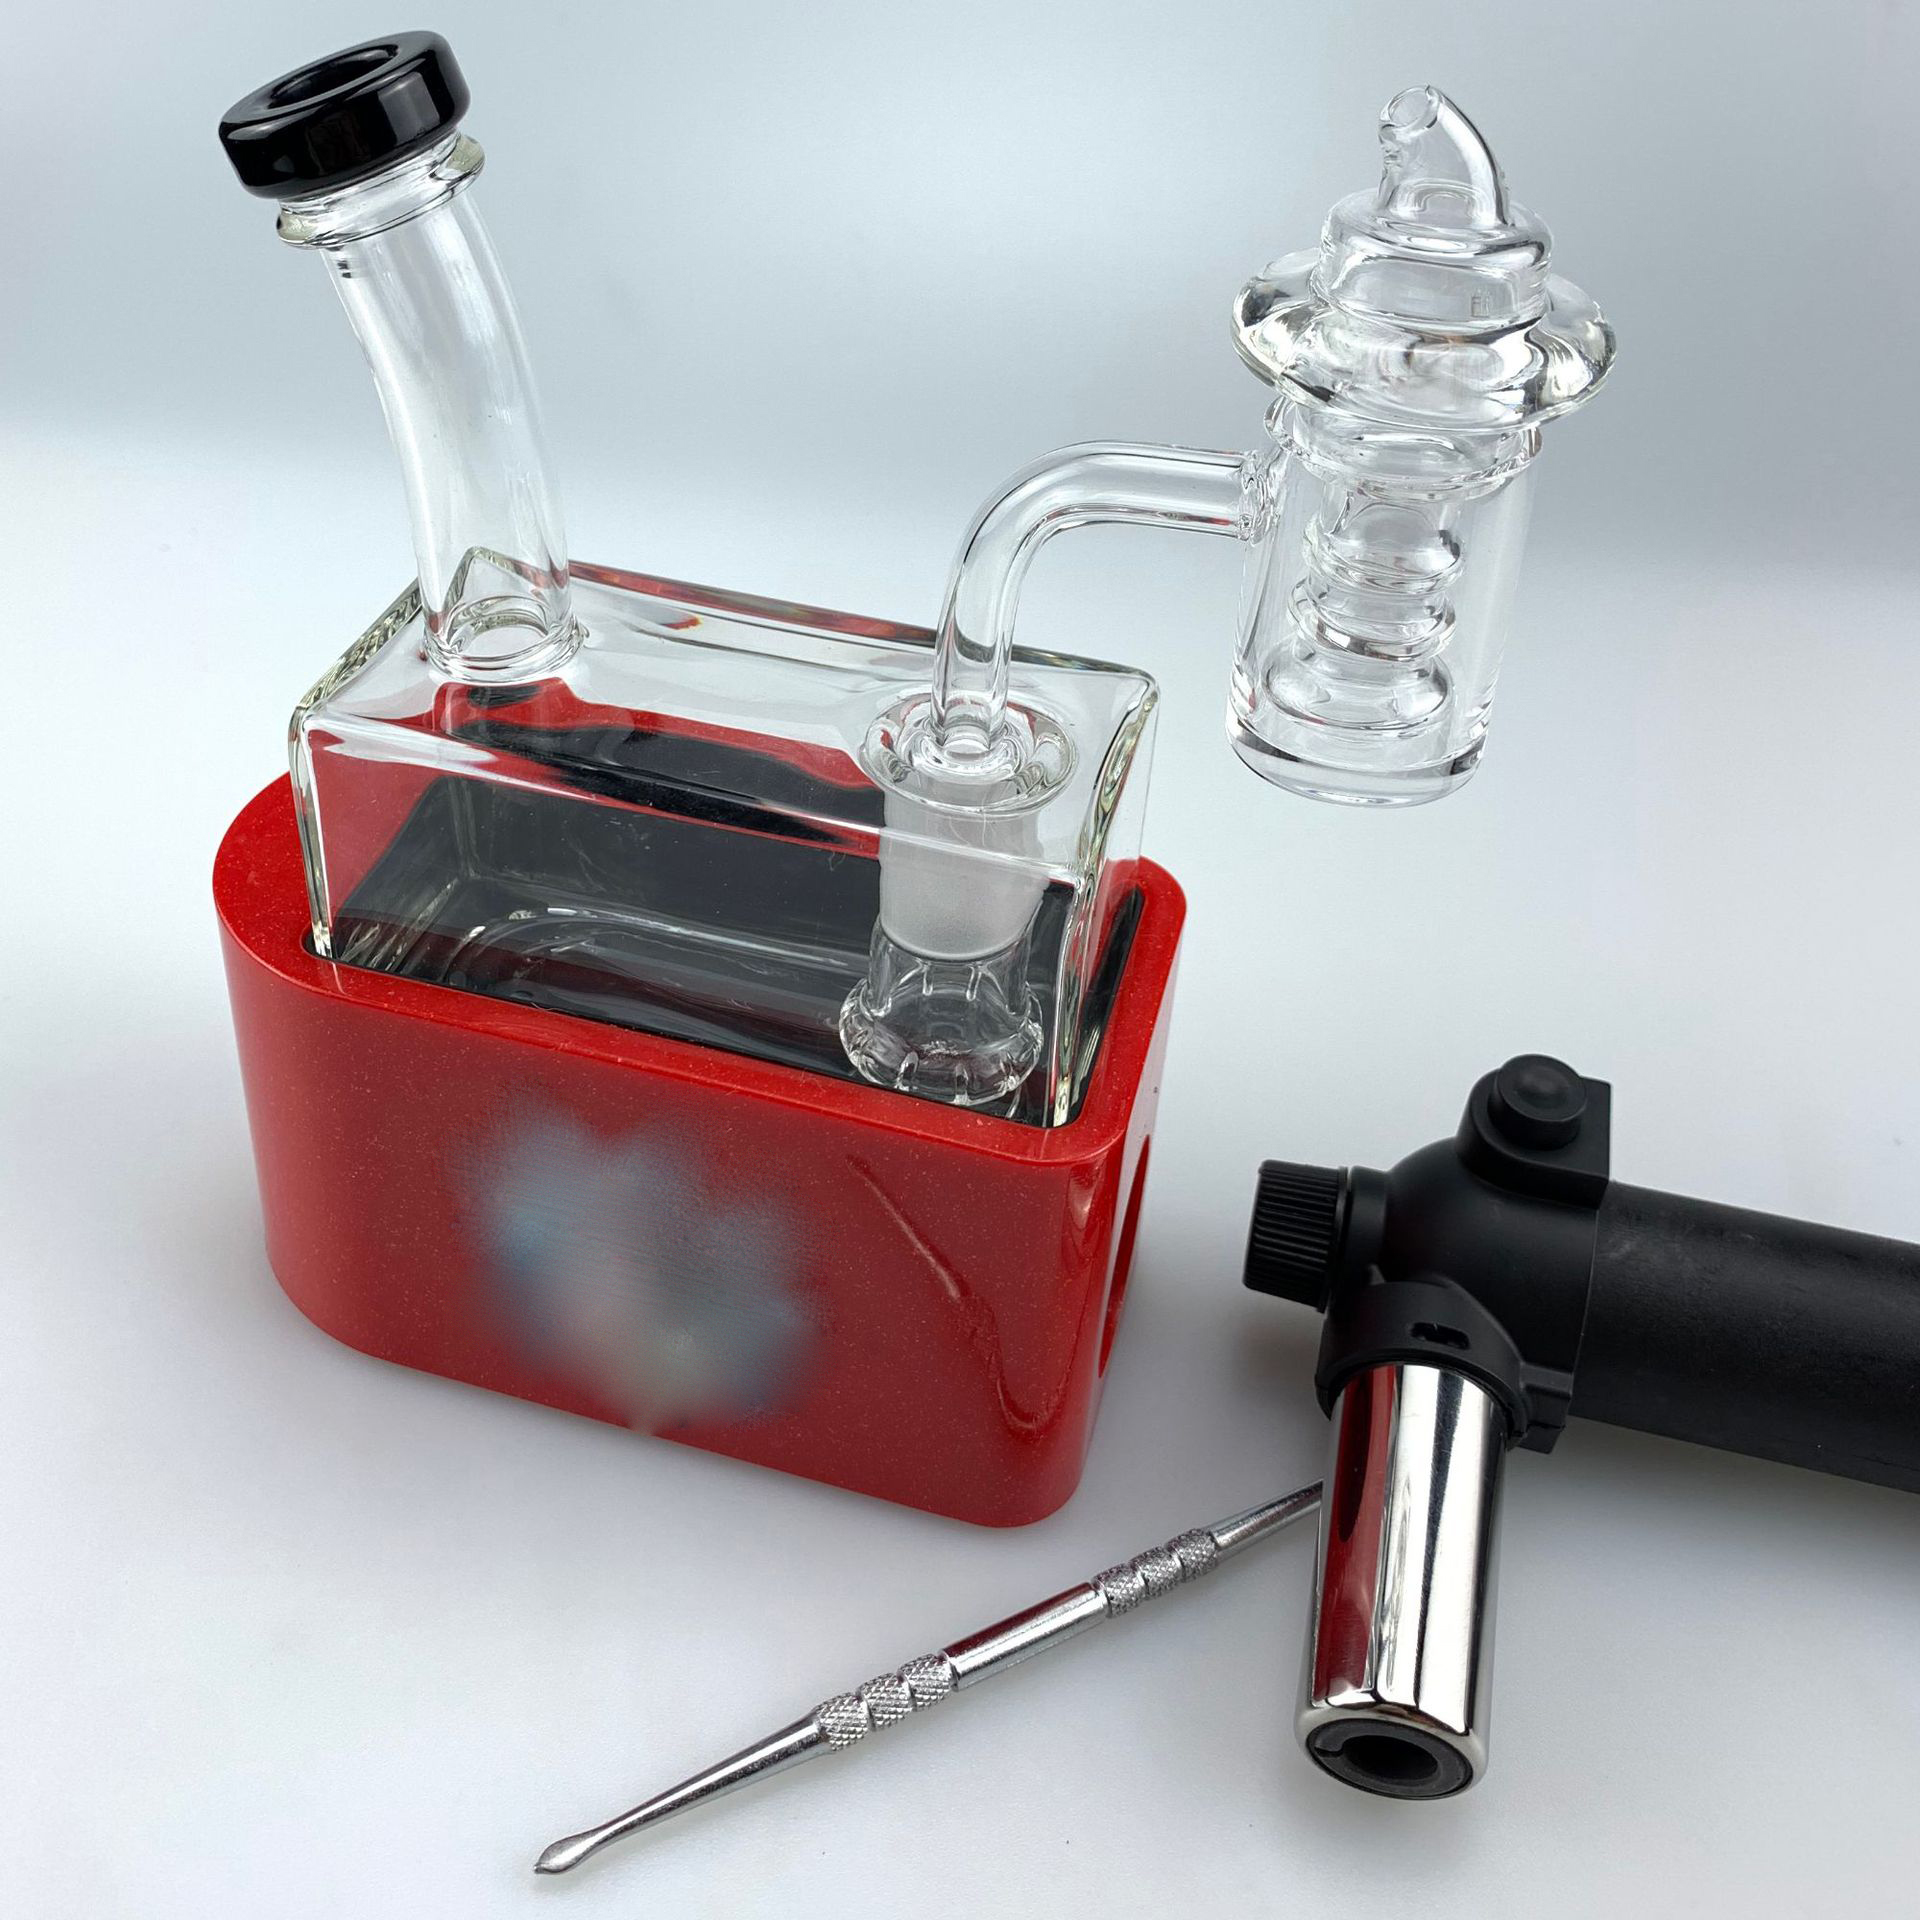 

Hotsale Glass Bong Smoking Kit Hookahs water pipe Dab Rig rig in one with Quartz Banger Carb Cap accessories set for Wax Concentrate Dabbing best quality